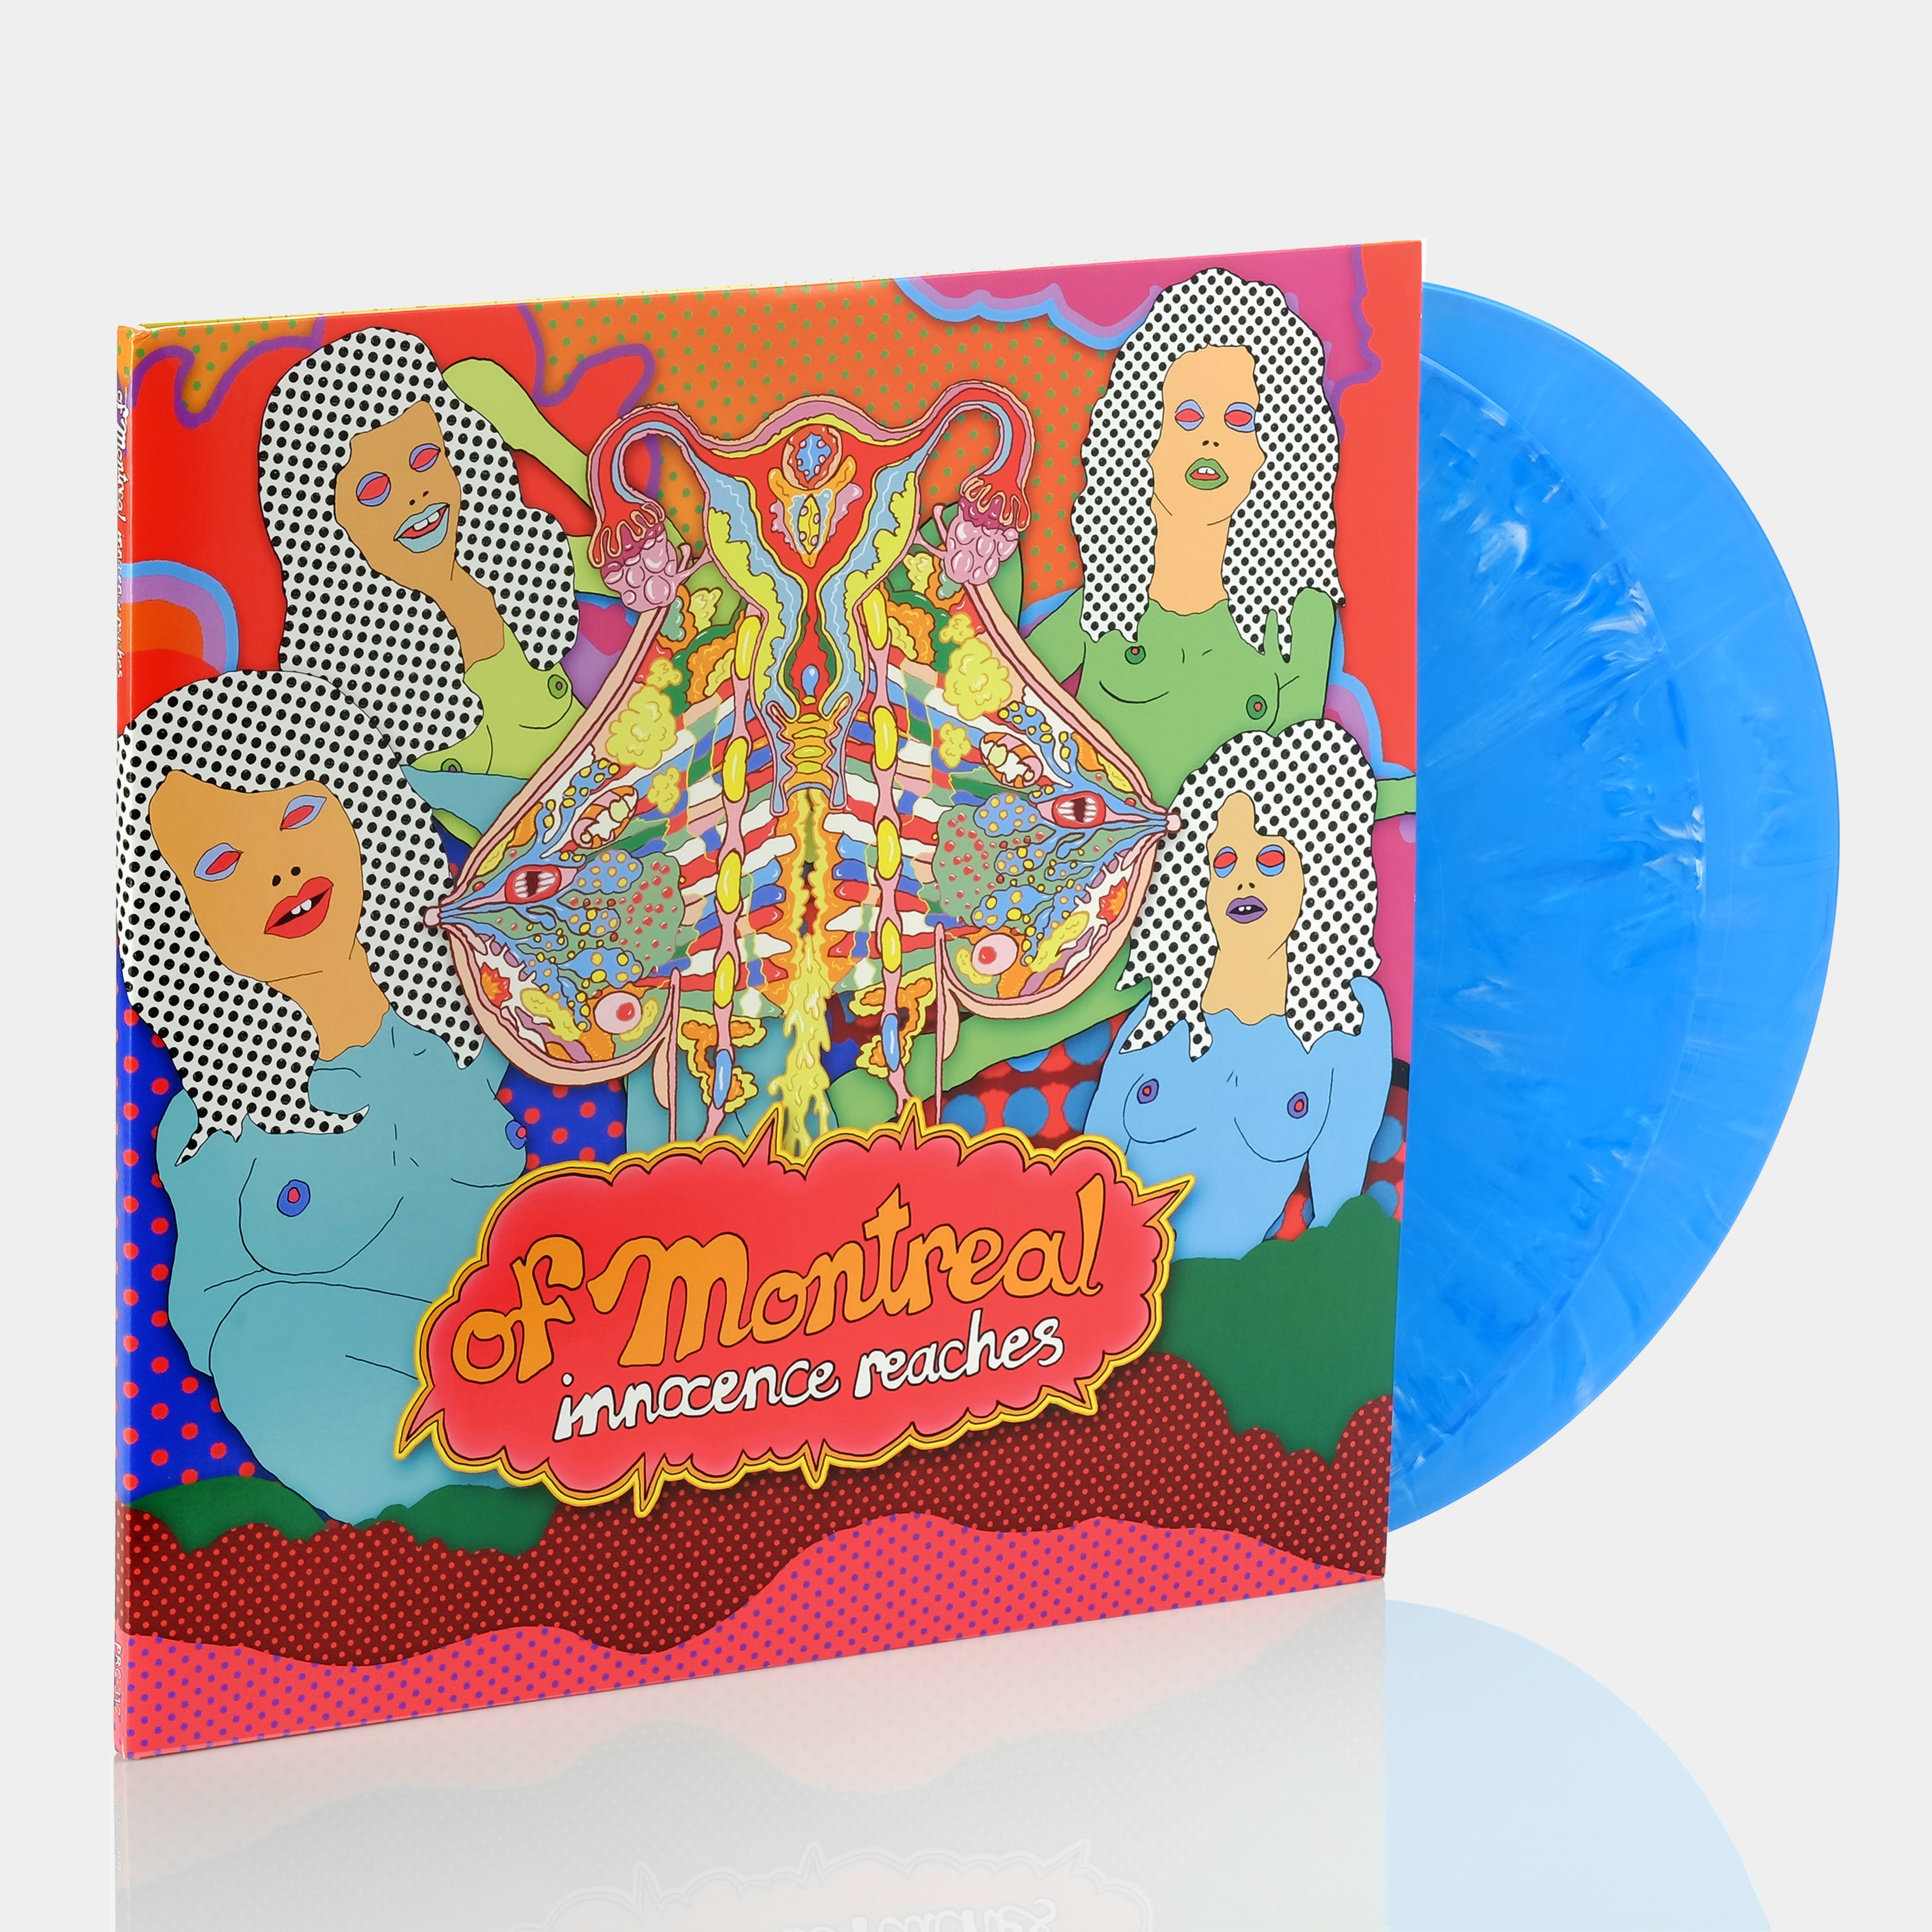 Of Montreal - Innocence Reaches 2xLP Blue White Marble Vinyl Record